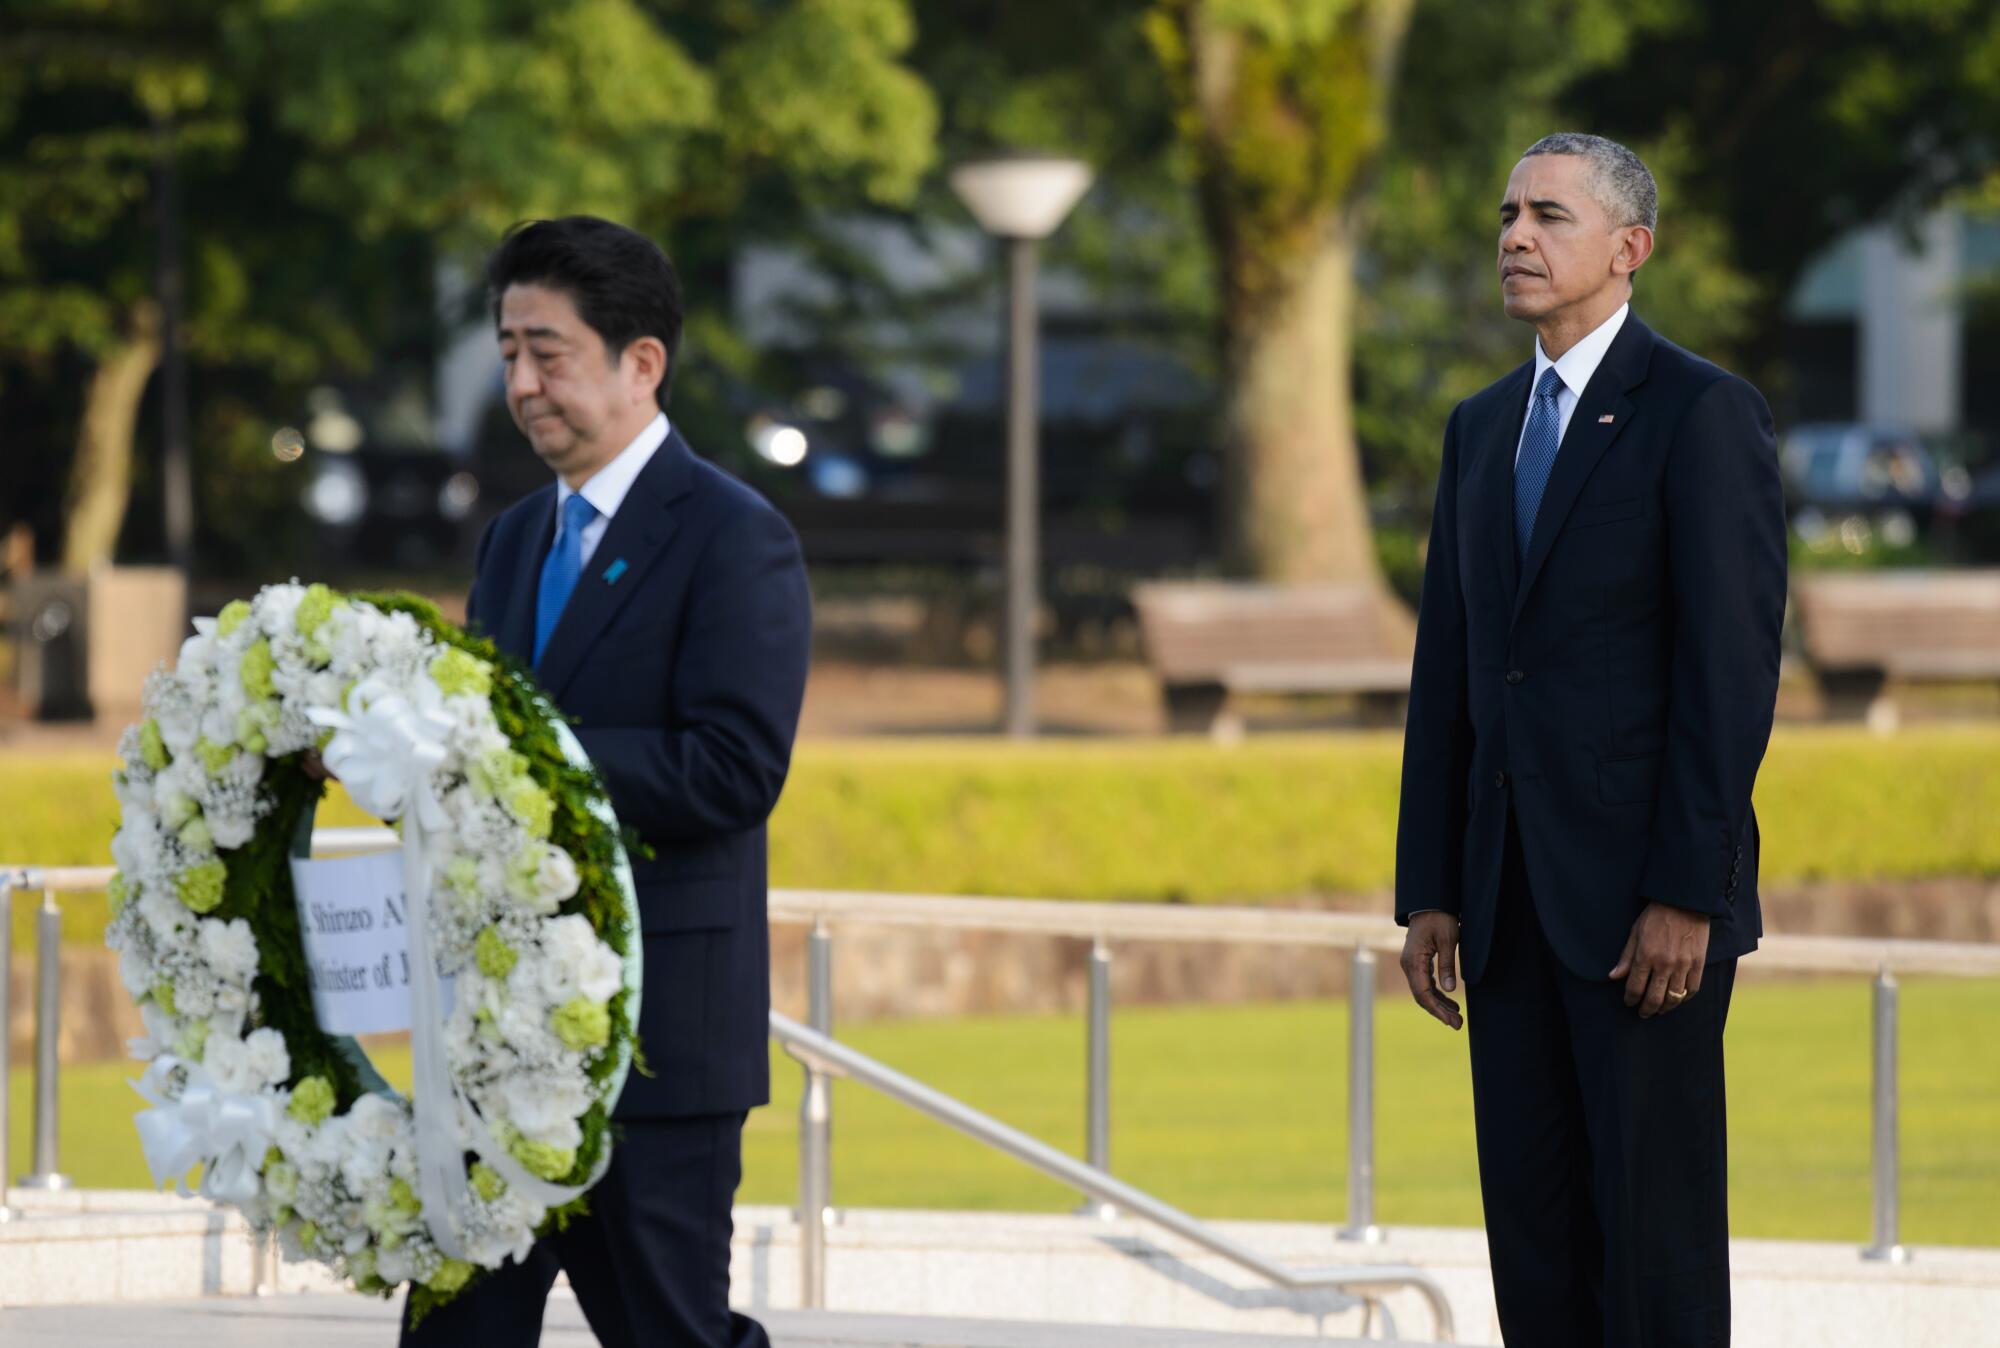 President Obama looks on as Shinzo Abe, Japan's primer minister, carries a wreath 